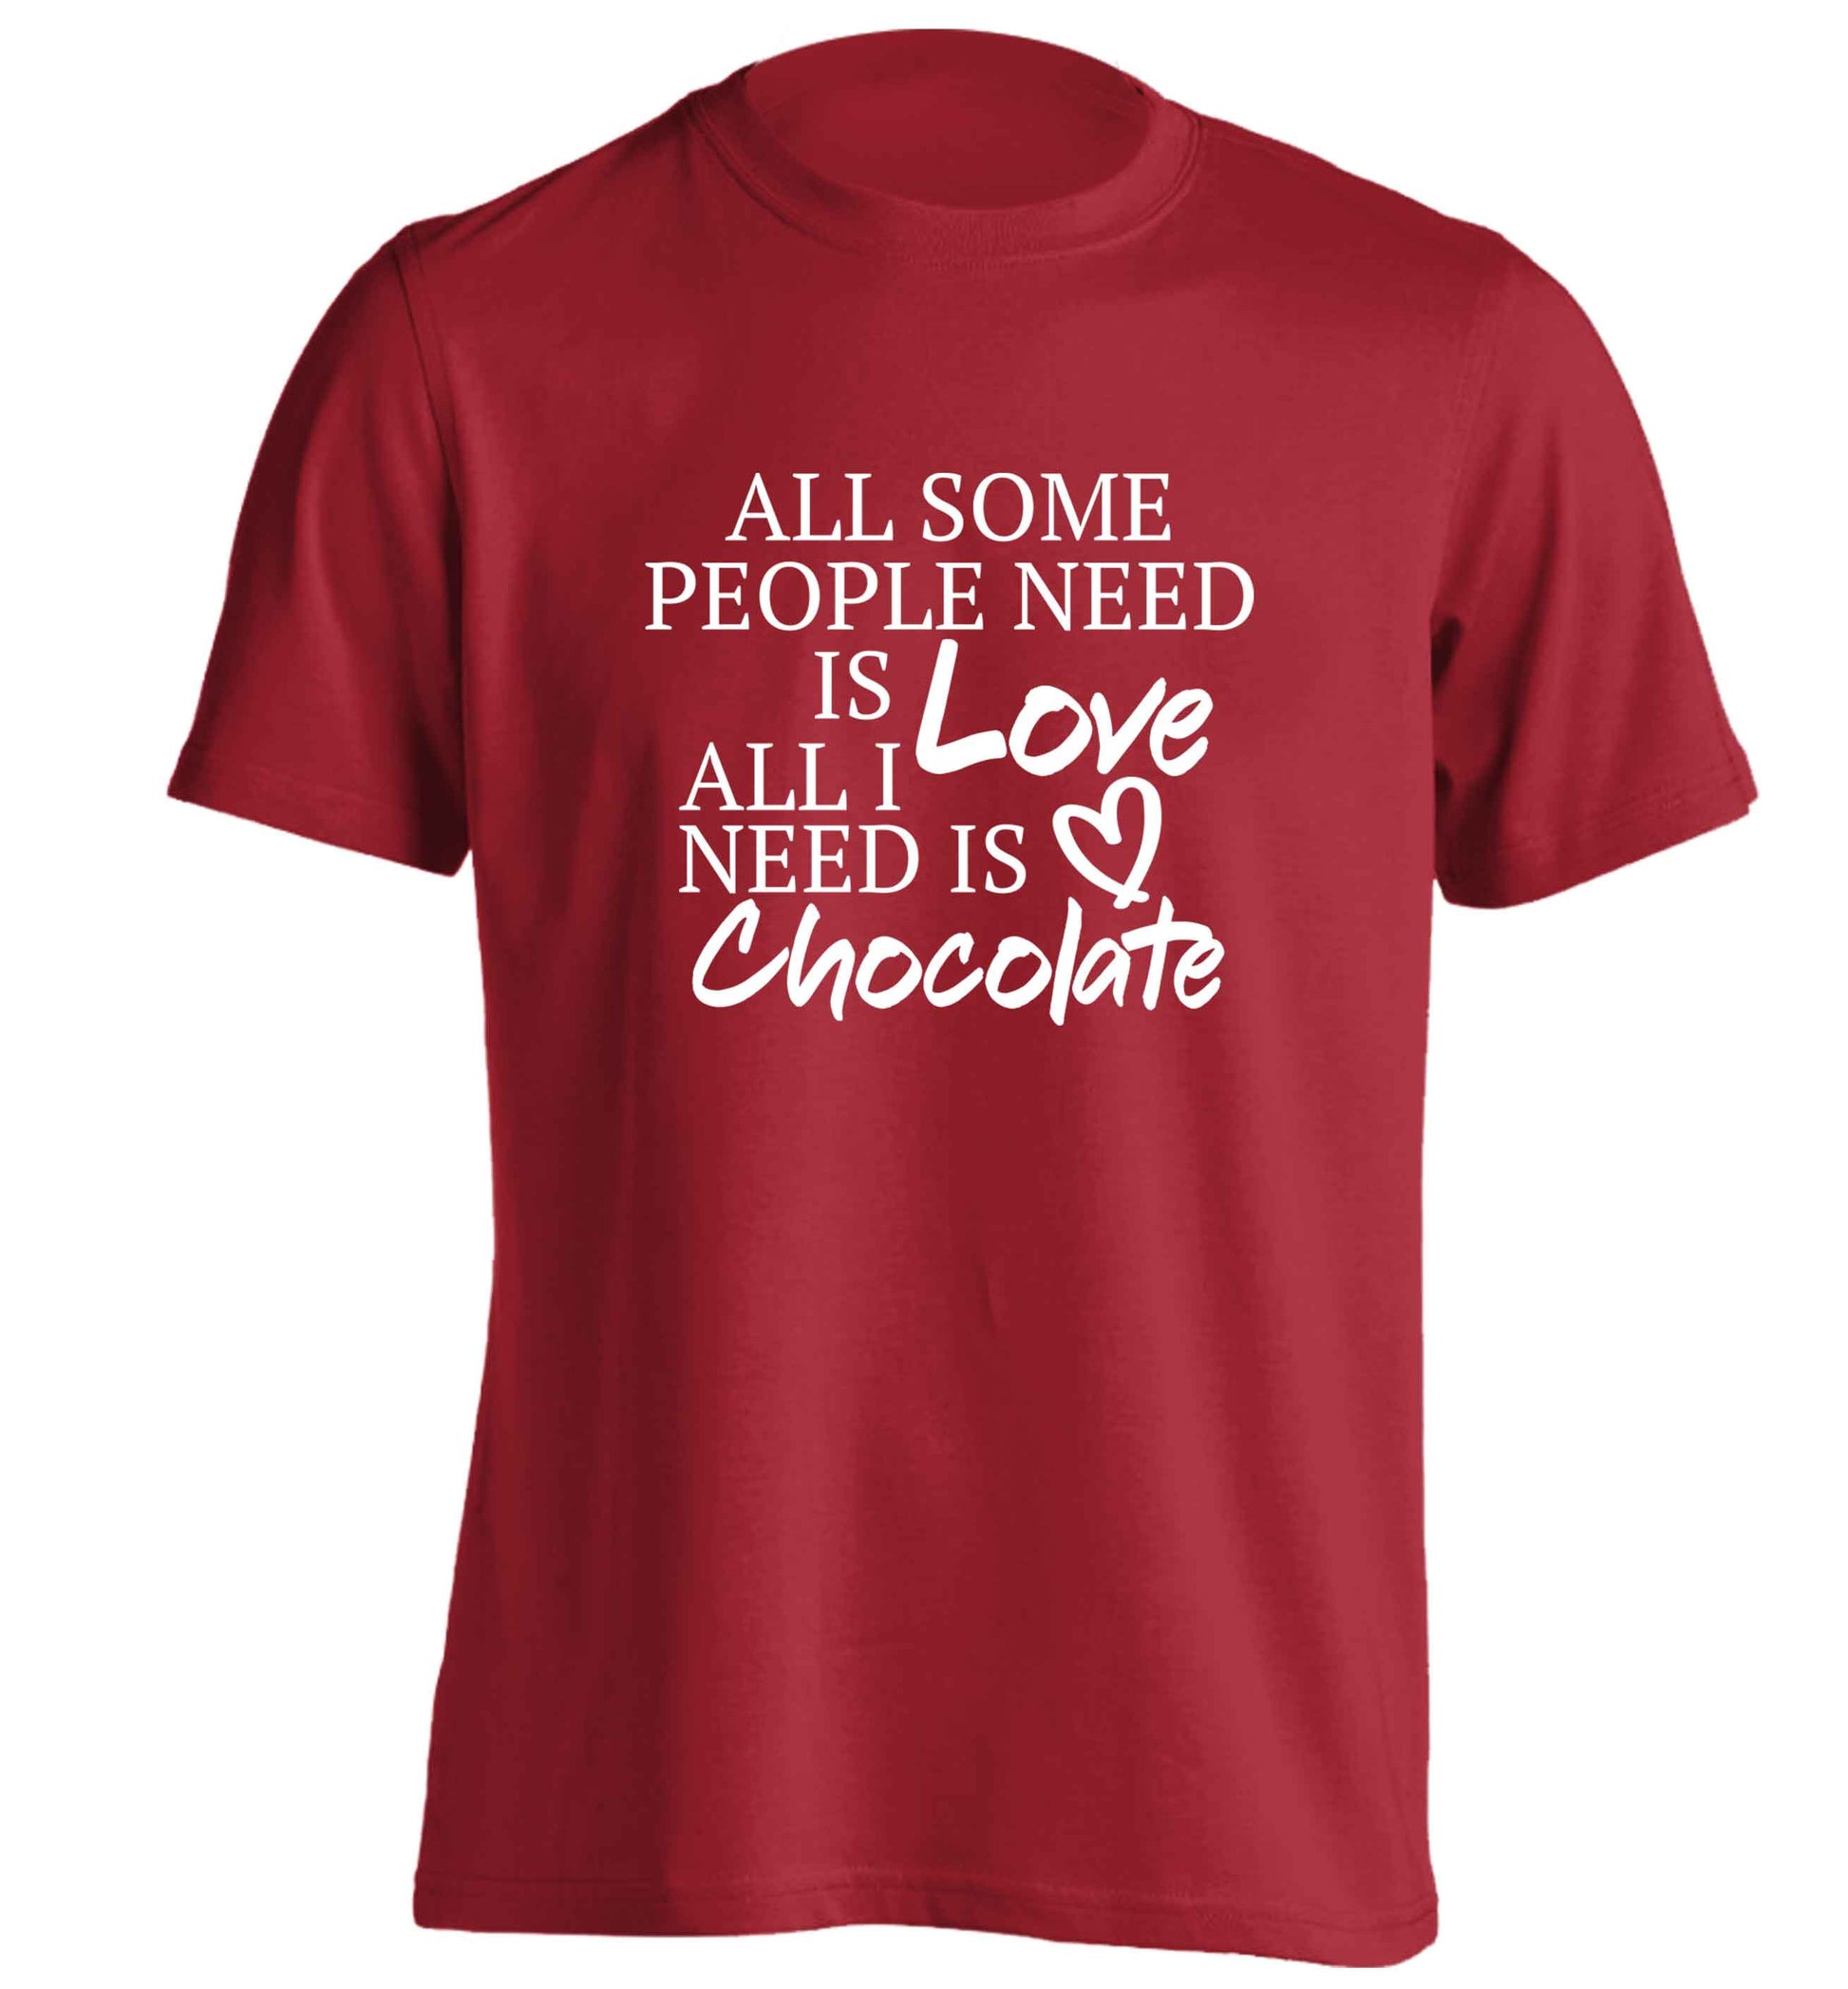 All some people need is love all I need is chocolate adults unisex red Tshirt 2XL